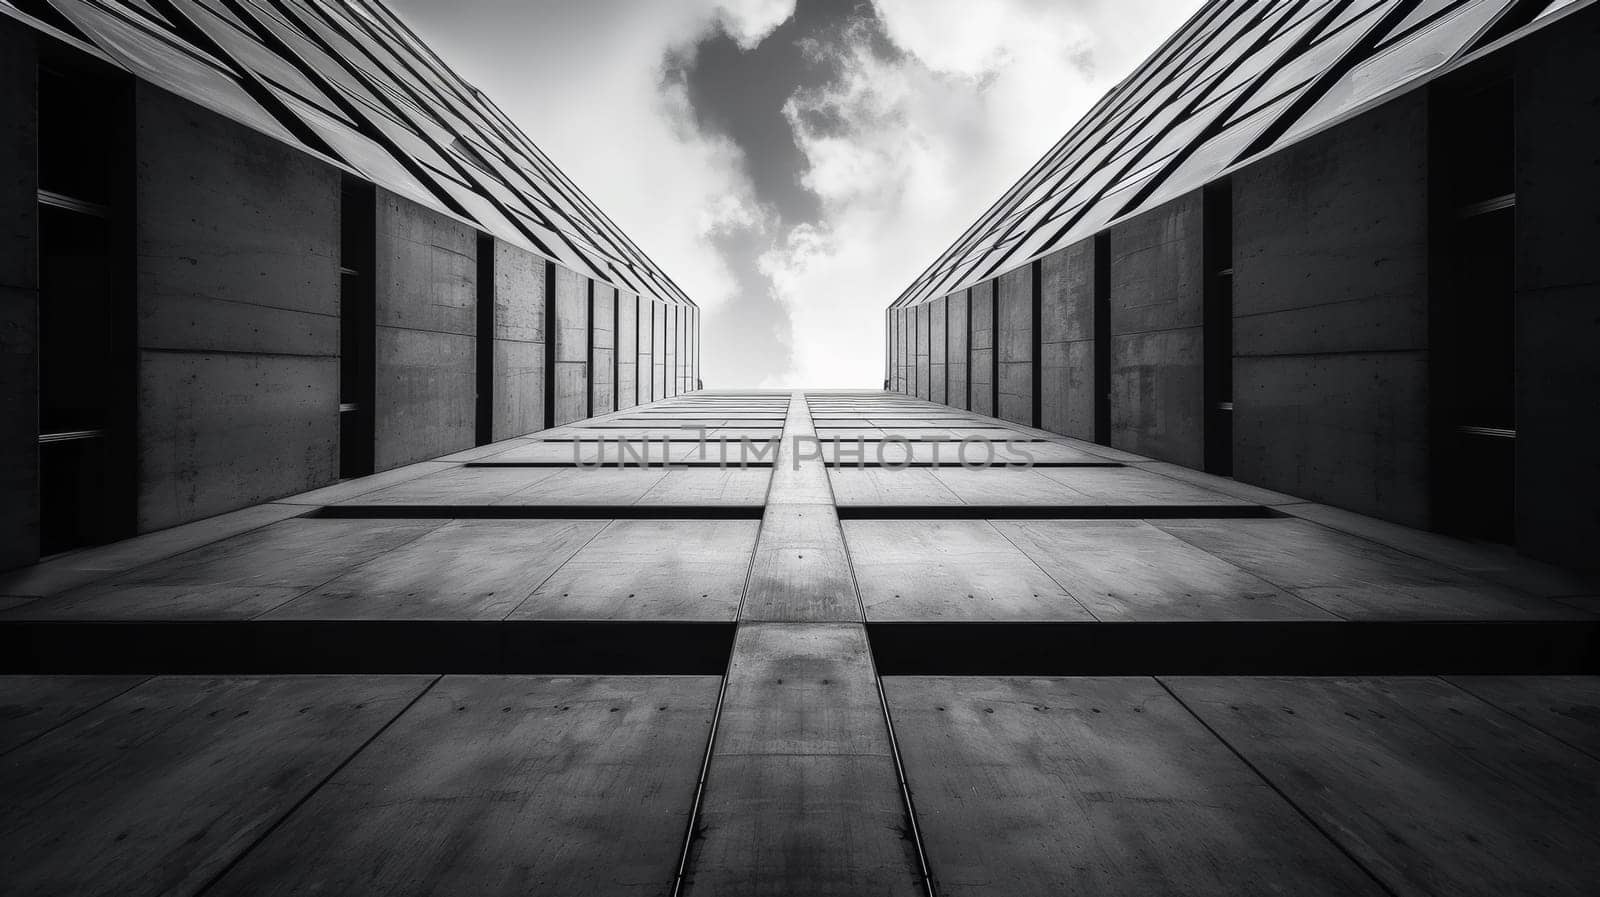 A black and white photo of a building with clouds in the sky